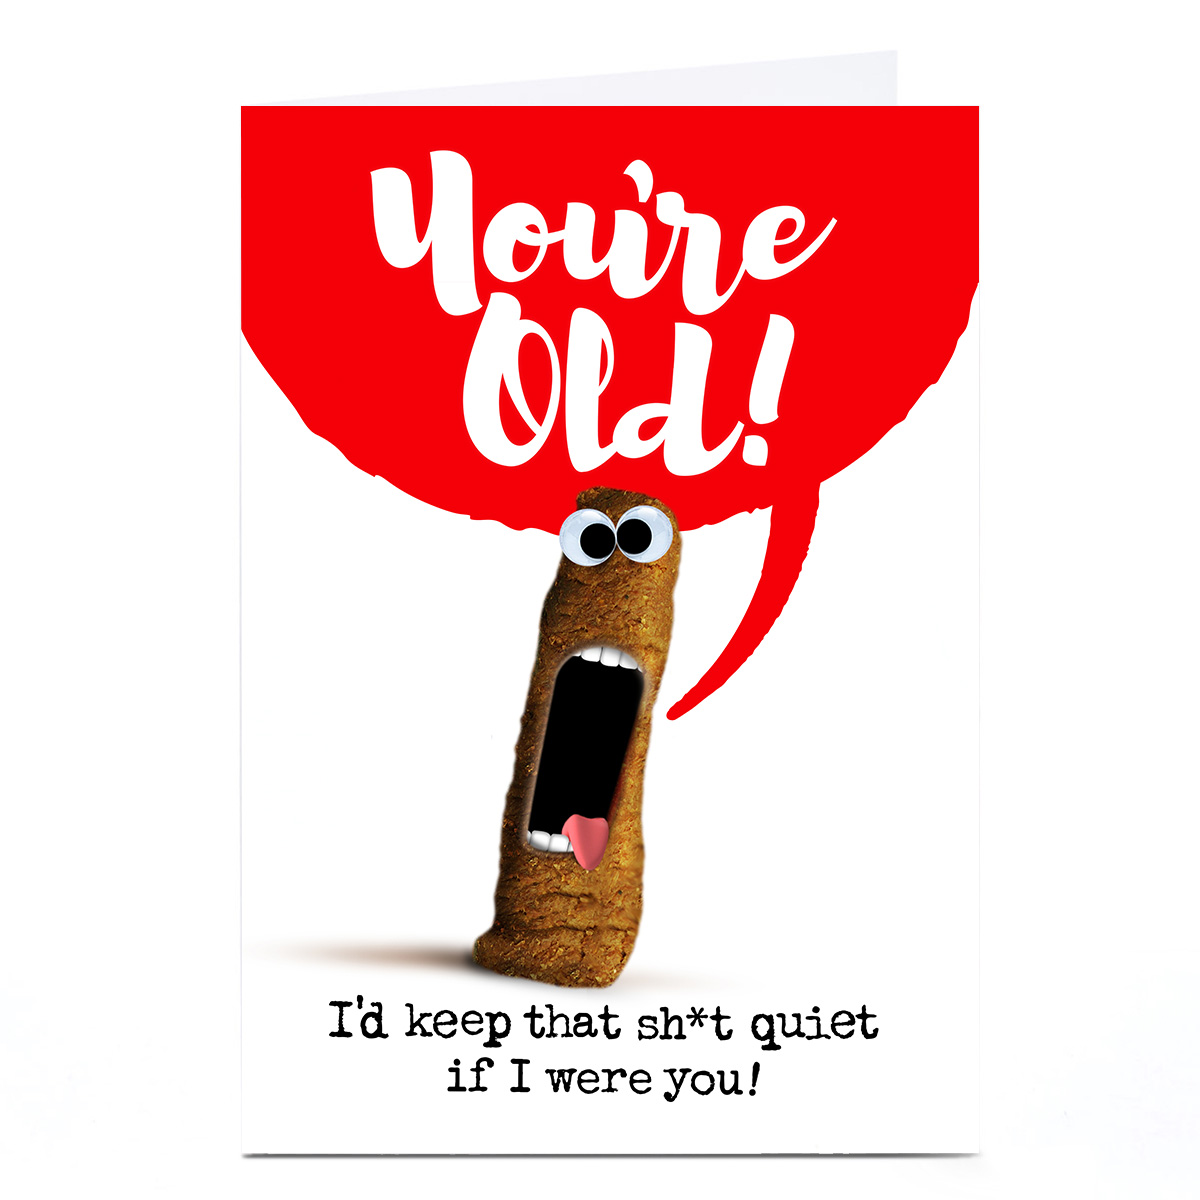 Personalised PG Quips Birthday Card - You're old!